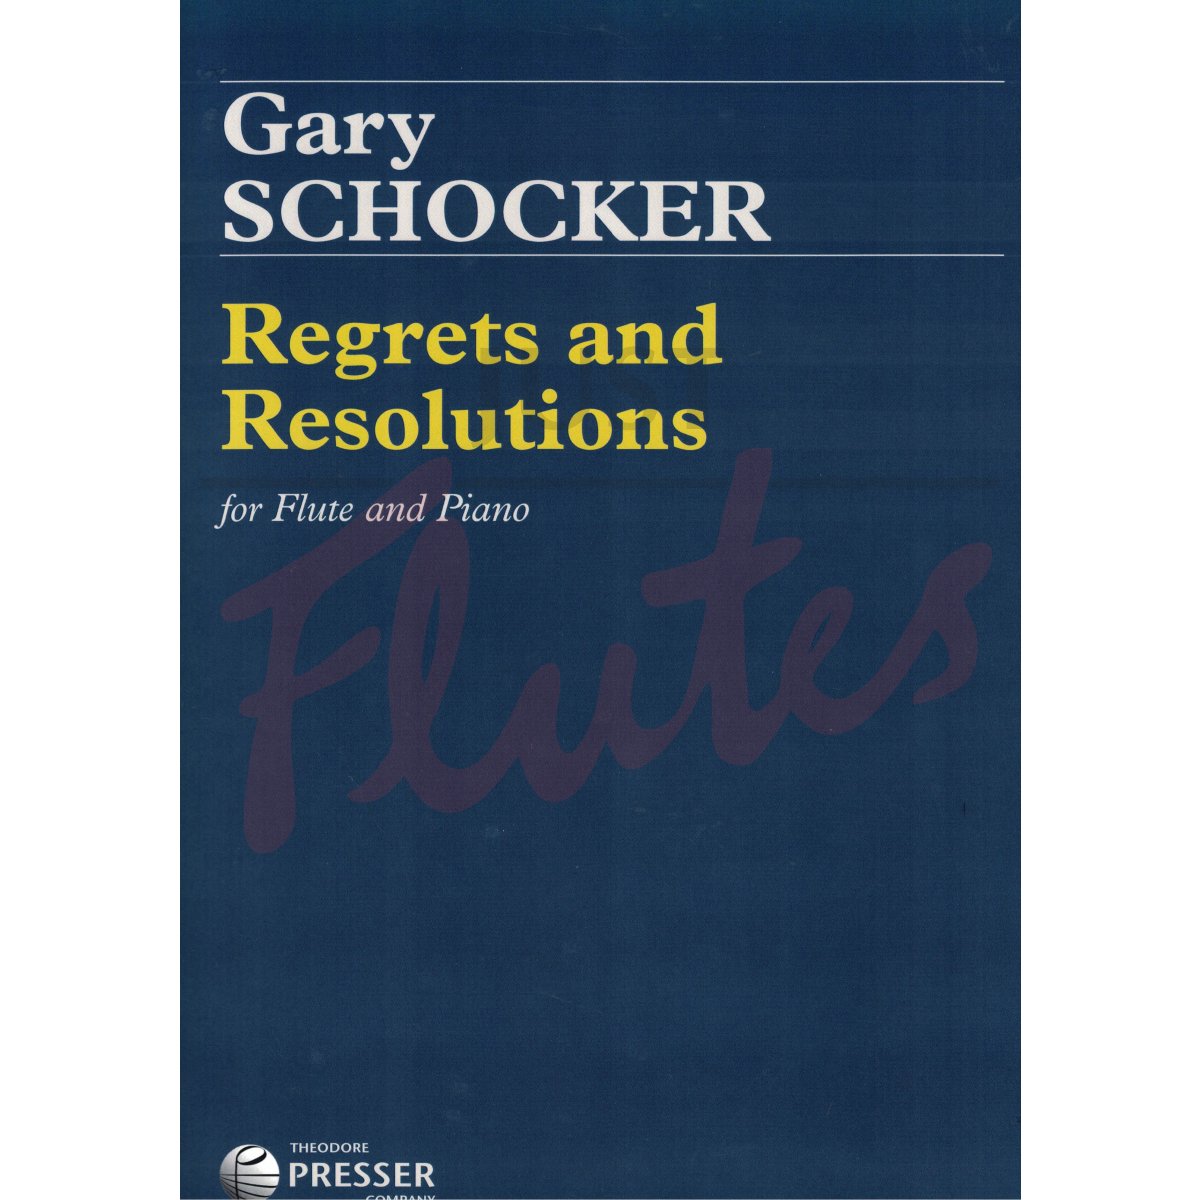 Regrets and Resolutions for Flute and Piano